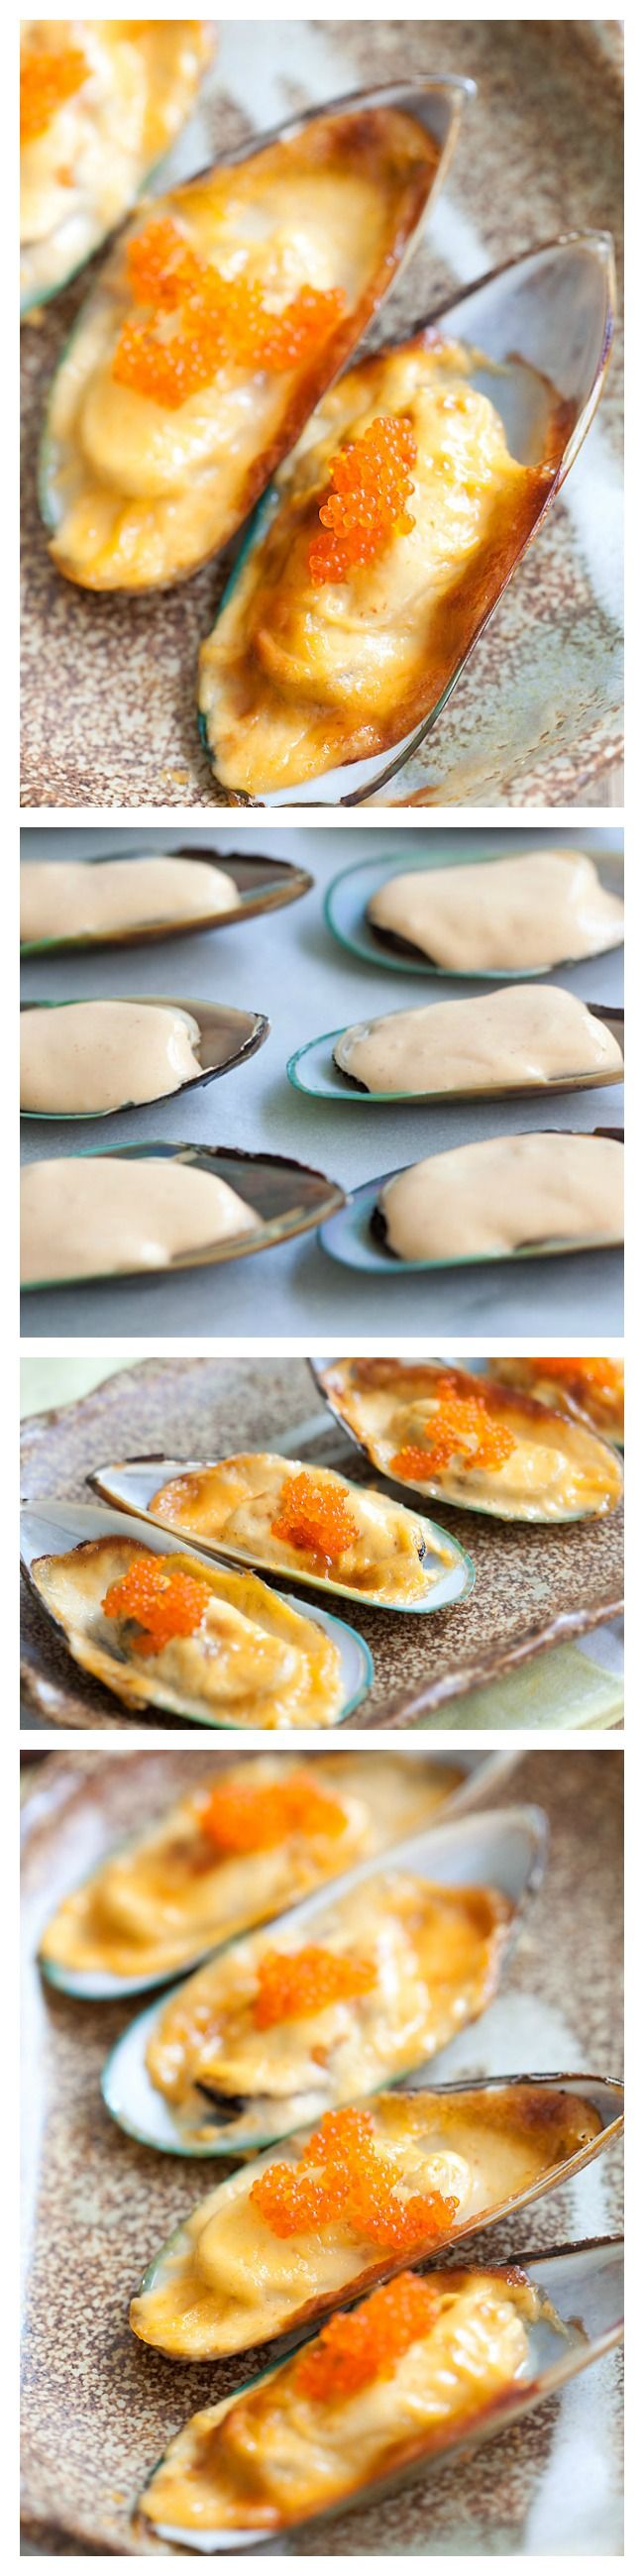 Cheese-mayo mussels or baked mussels dynamite is so delicious. Easy recipe with cheese, mayo, mussels and you have the most amazing appetizer ever | rasamalaysia.com